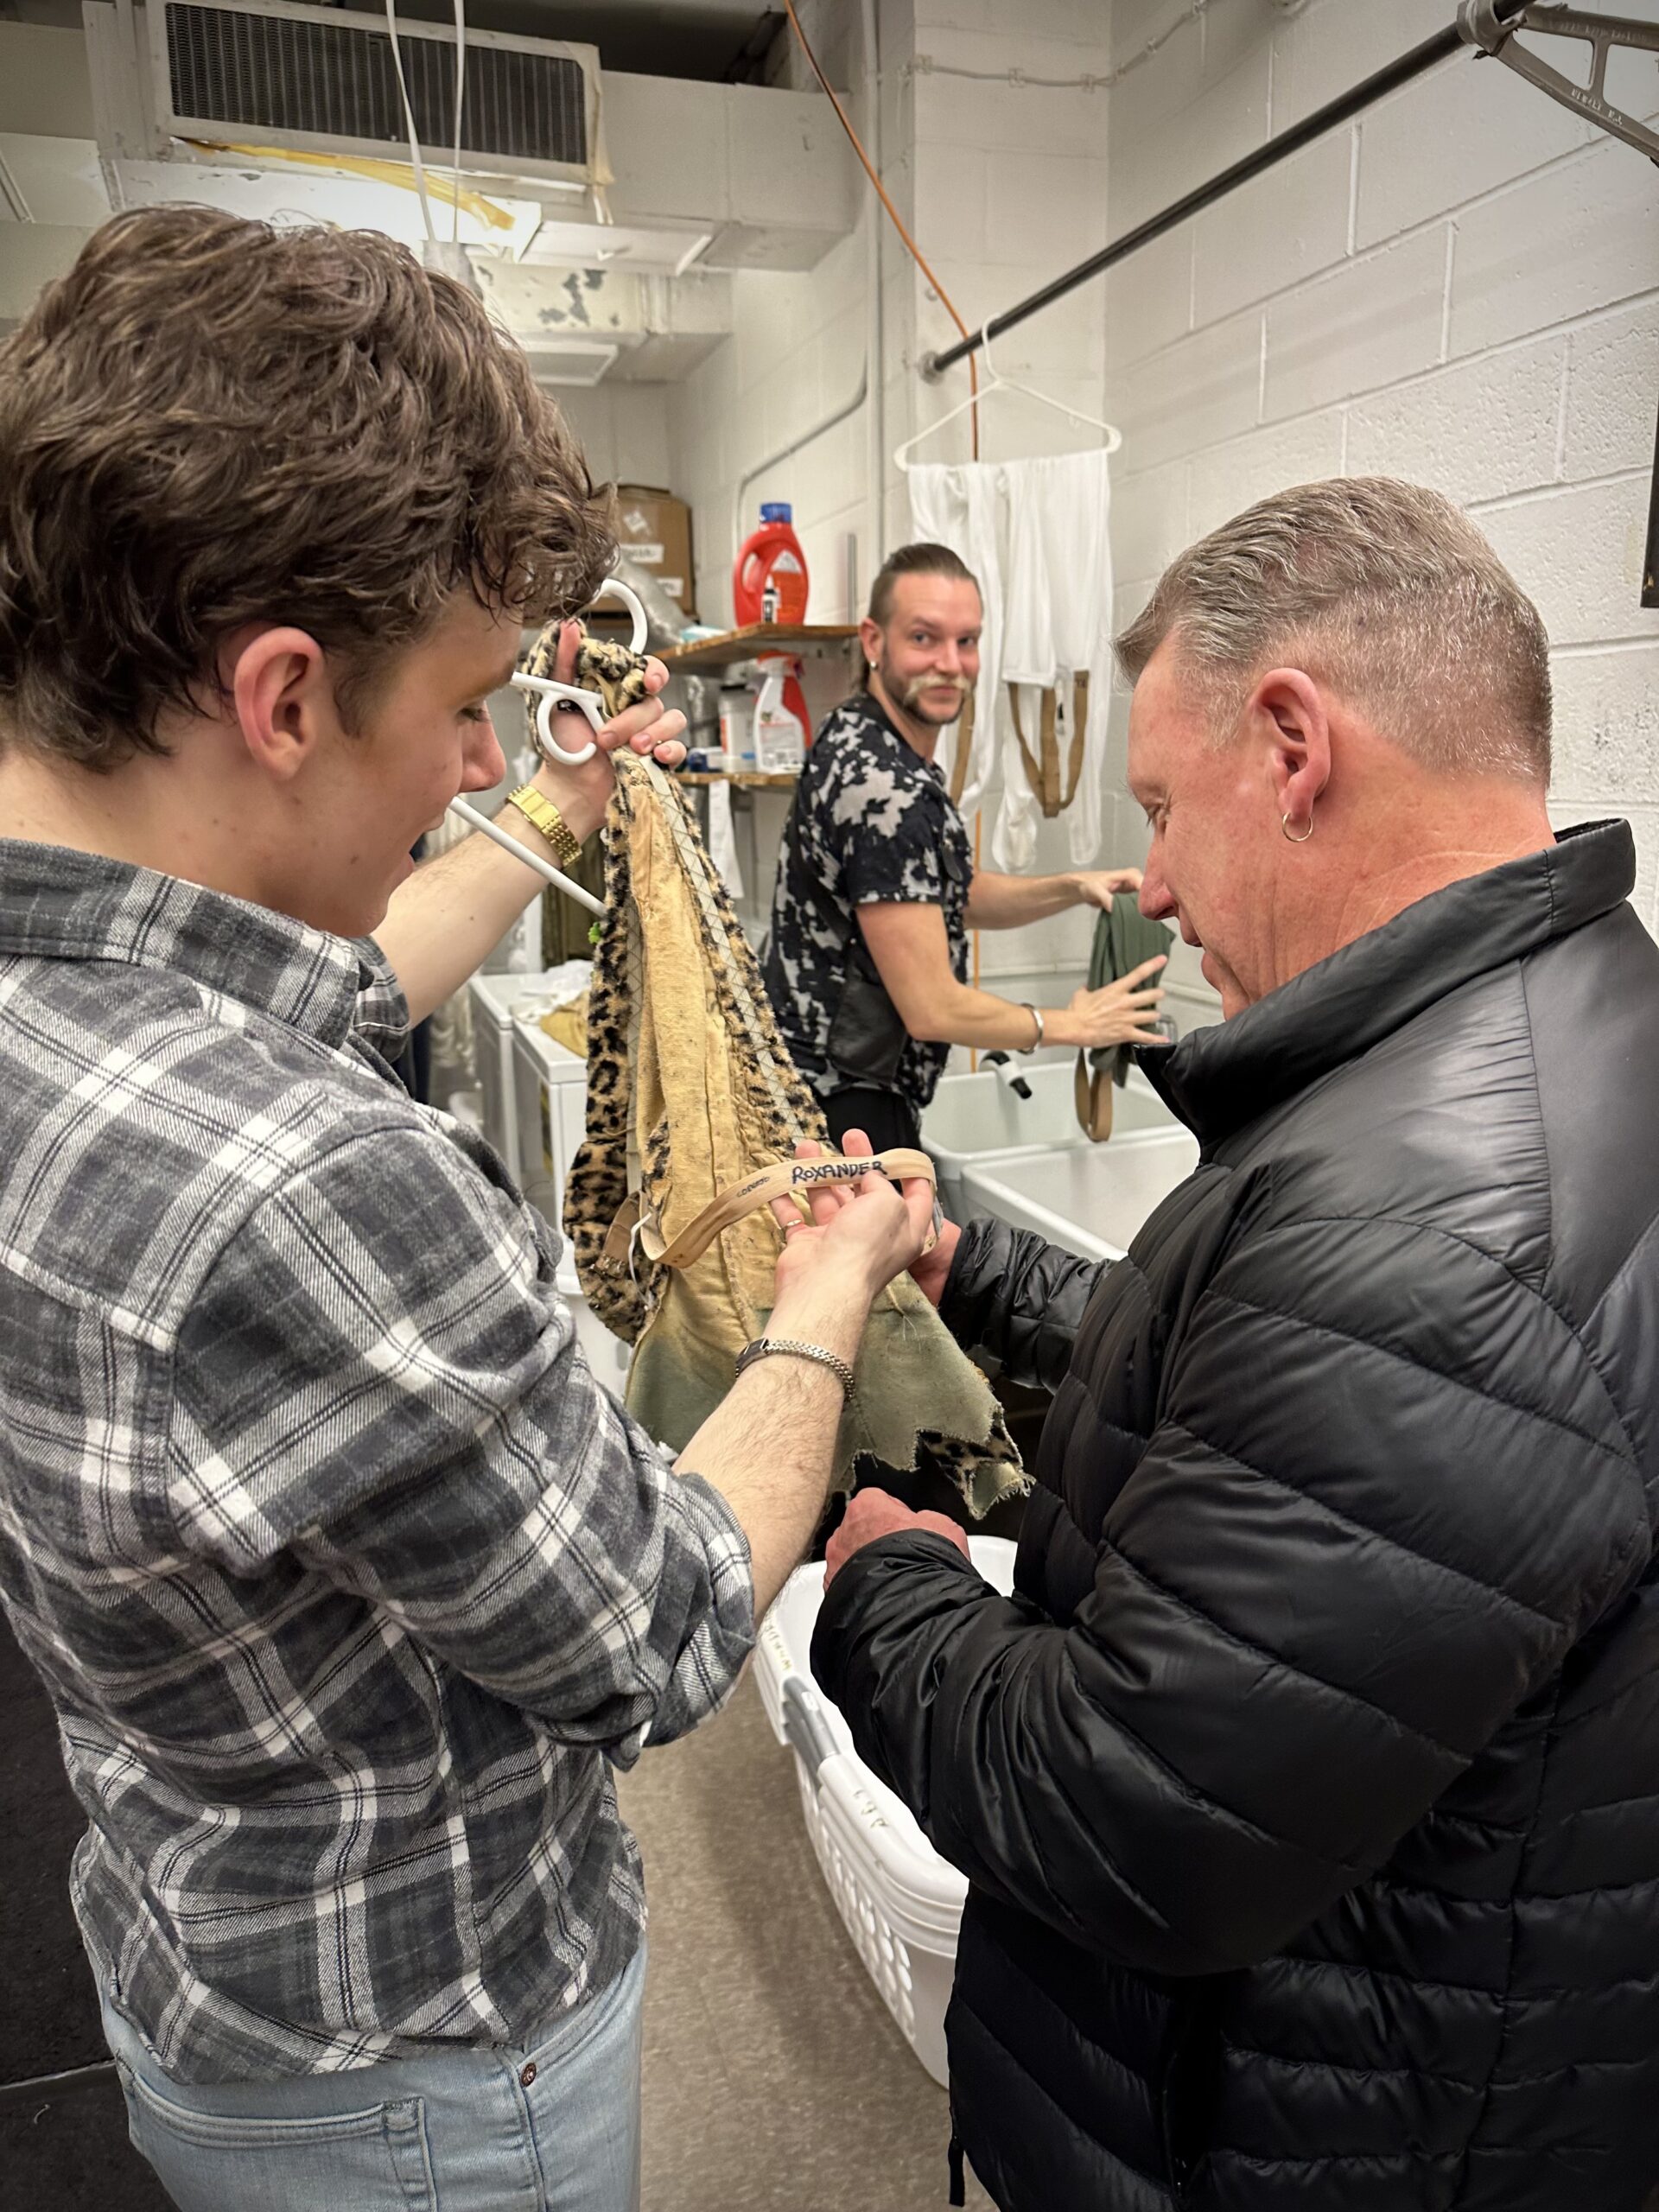 Jake Roxander and David Roxander stand in a theater's costume room. Jake holds up a leopard print costume and holds up a tag that says "Roxander" as his father holds the bottom of the material. They are both wearing street clothing and photographed from behind. A man washing out tights in the sink in the background looks at them and smiles.